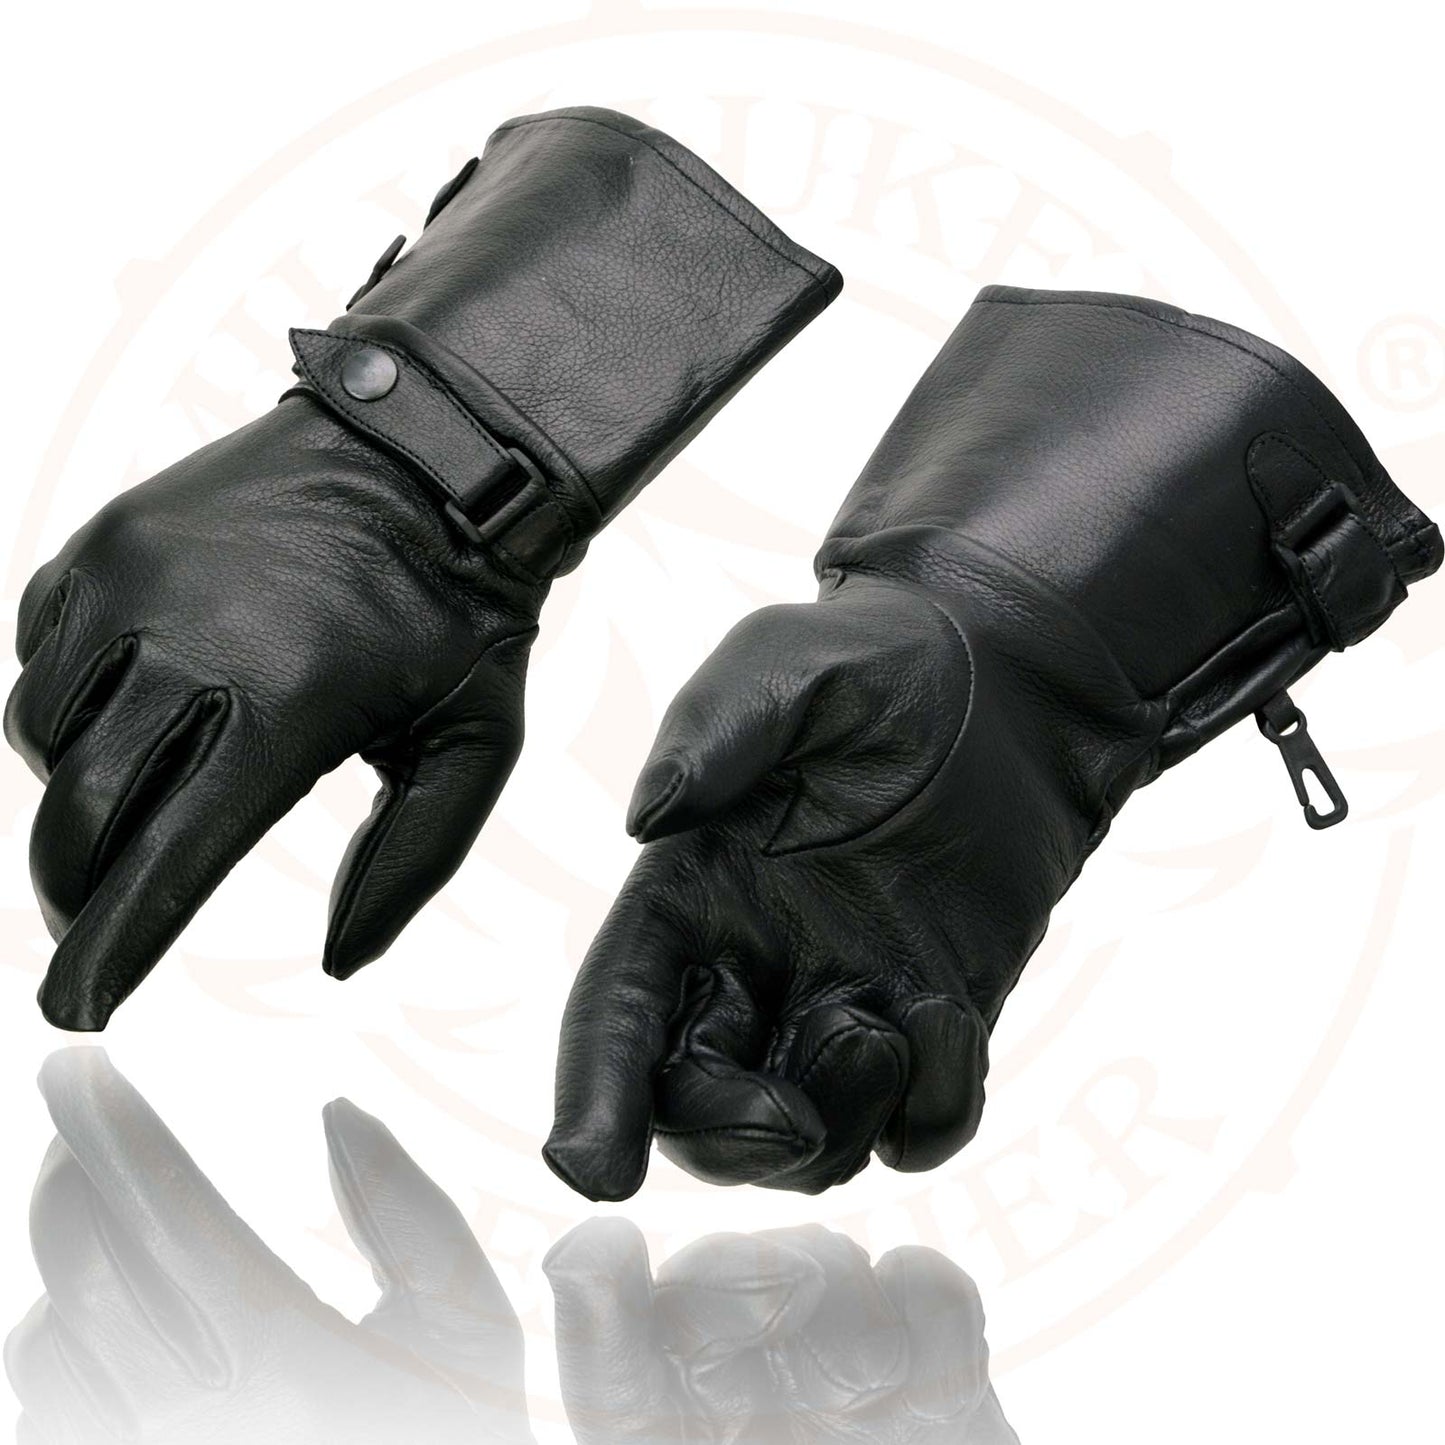 Milwaukee Leather Men's Gauntlet Motorcycle Hand Gloves-Black Leather Long Cuff Snap Closure Thermal Lined-SH264